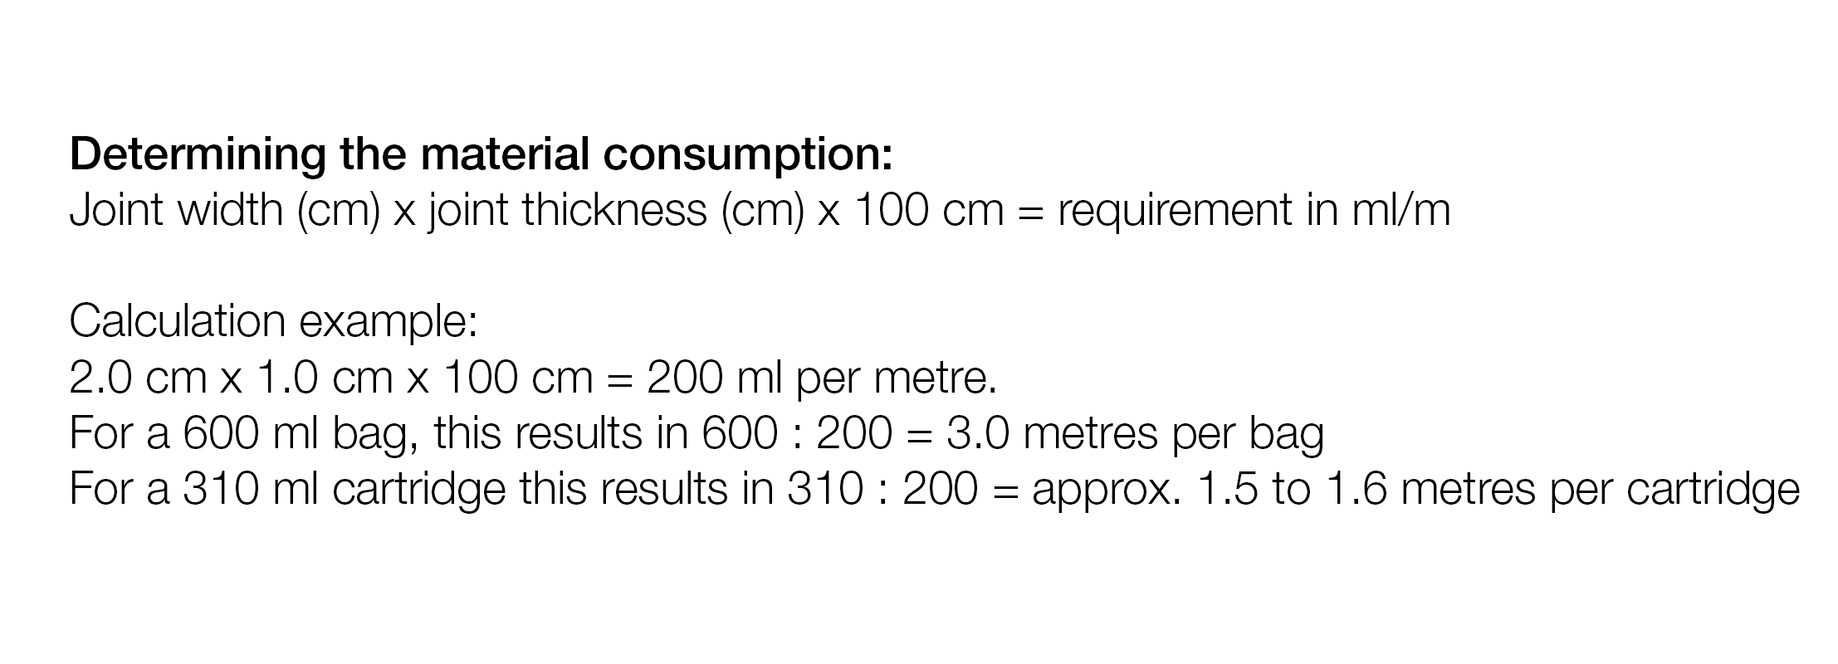 Listing and calculation example Determination of material consumption